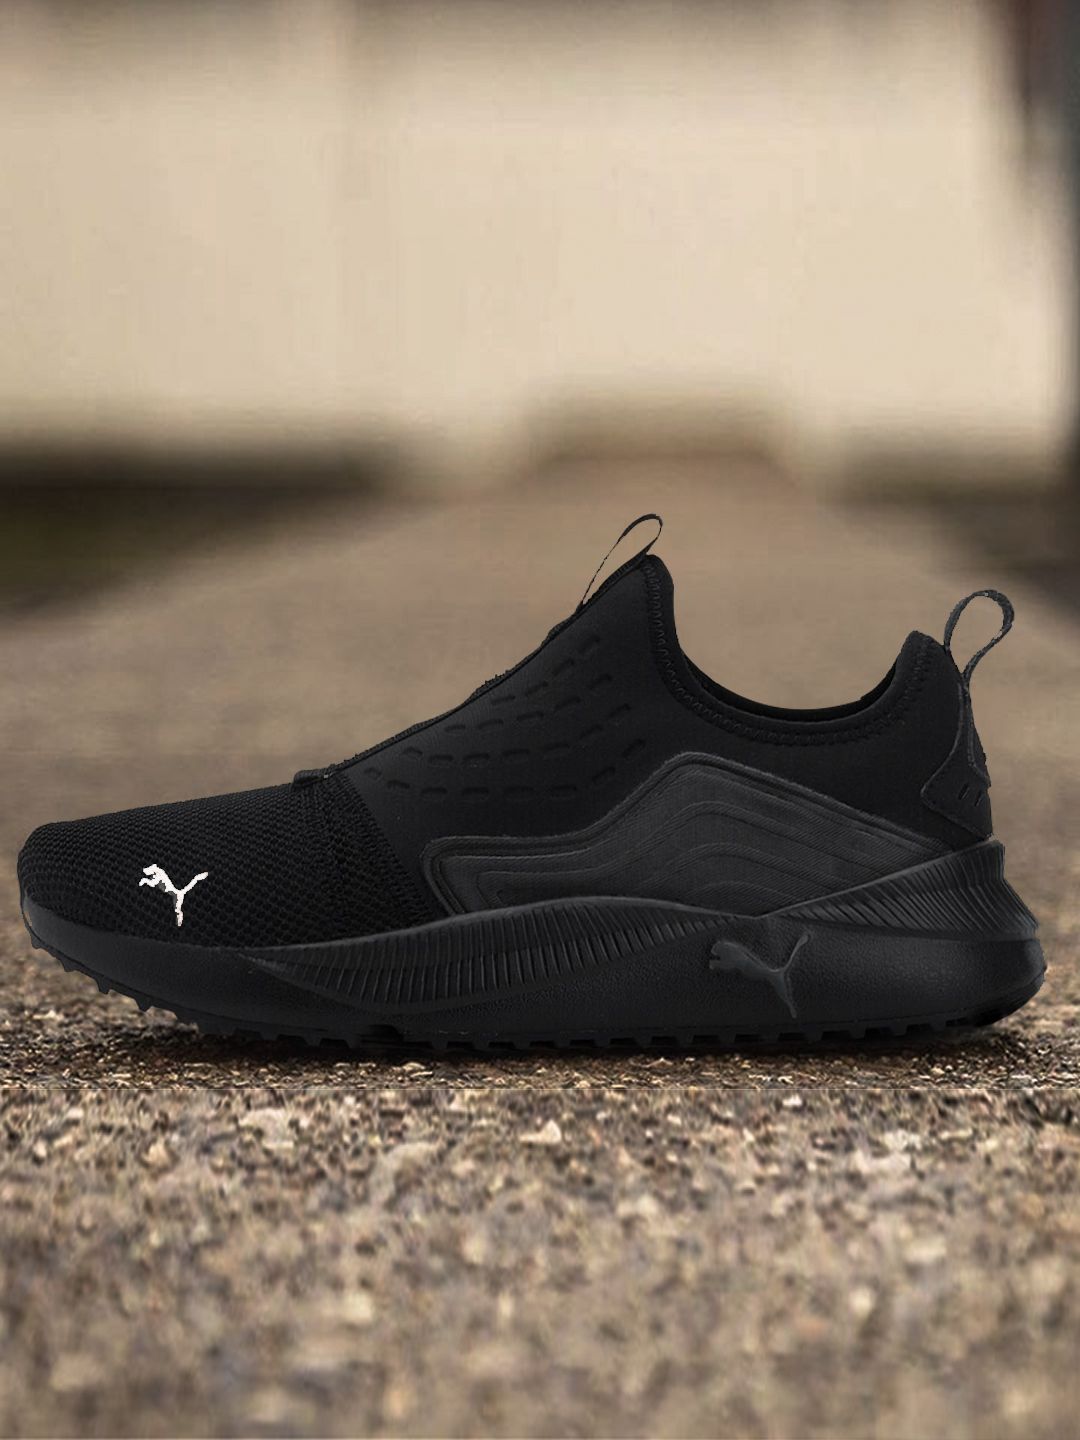 Puma Pacer Future Unisex Black Solid Slip-On Sneakers Price in India